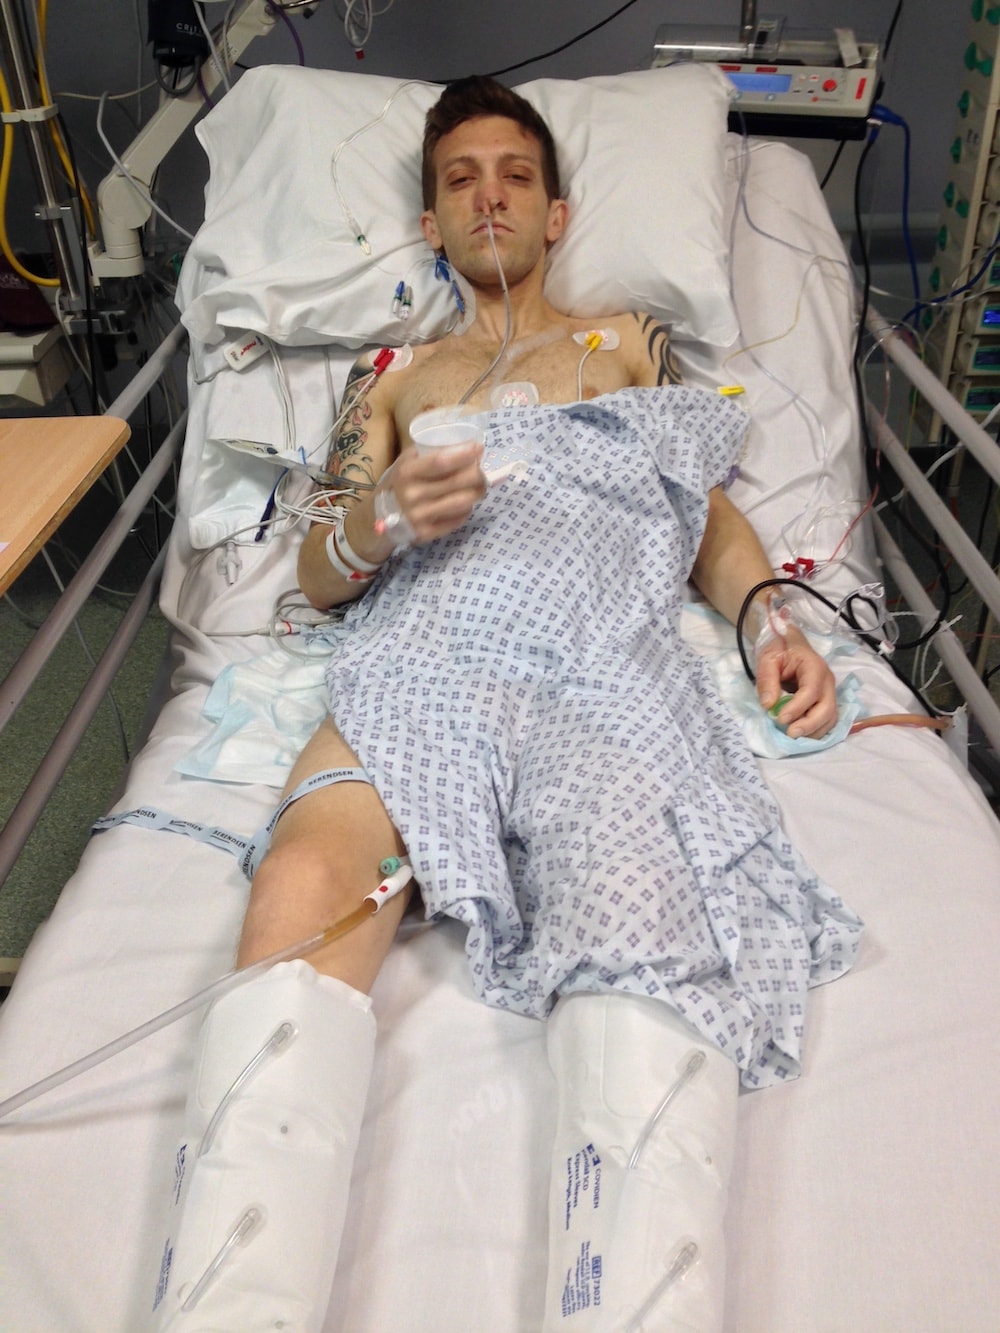 Rob in hospital